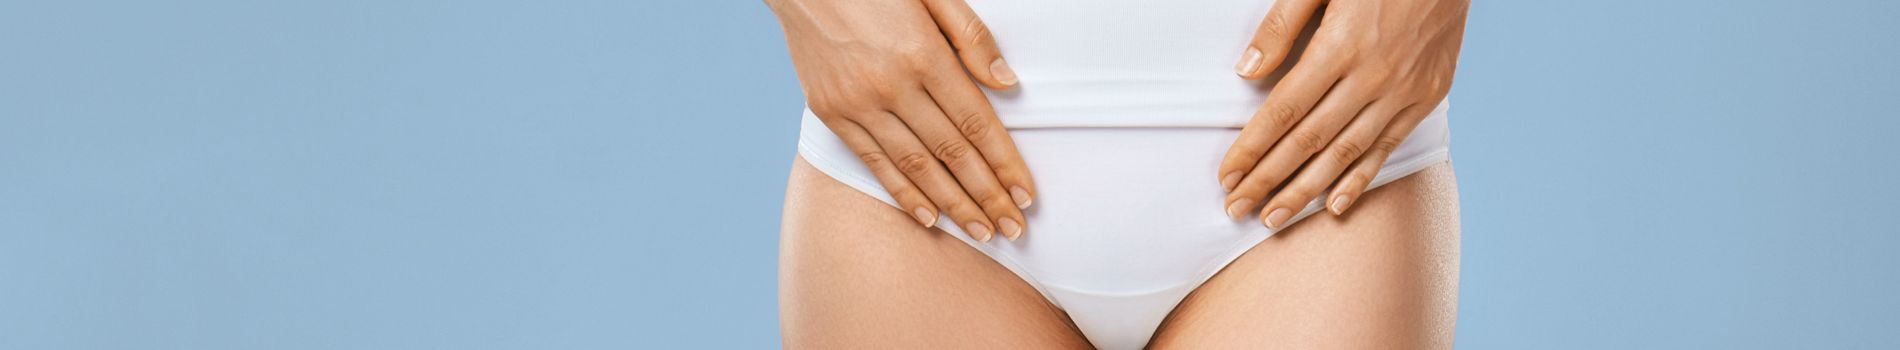 Can iodine alter menstrual cycles